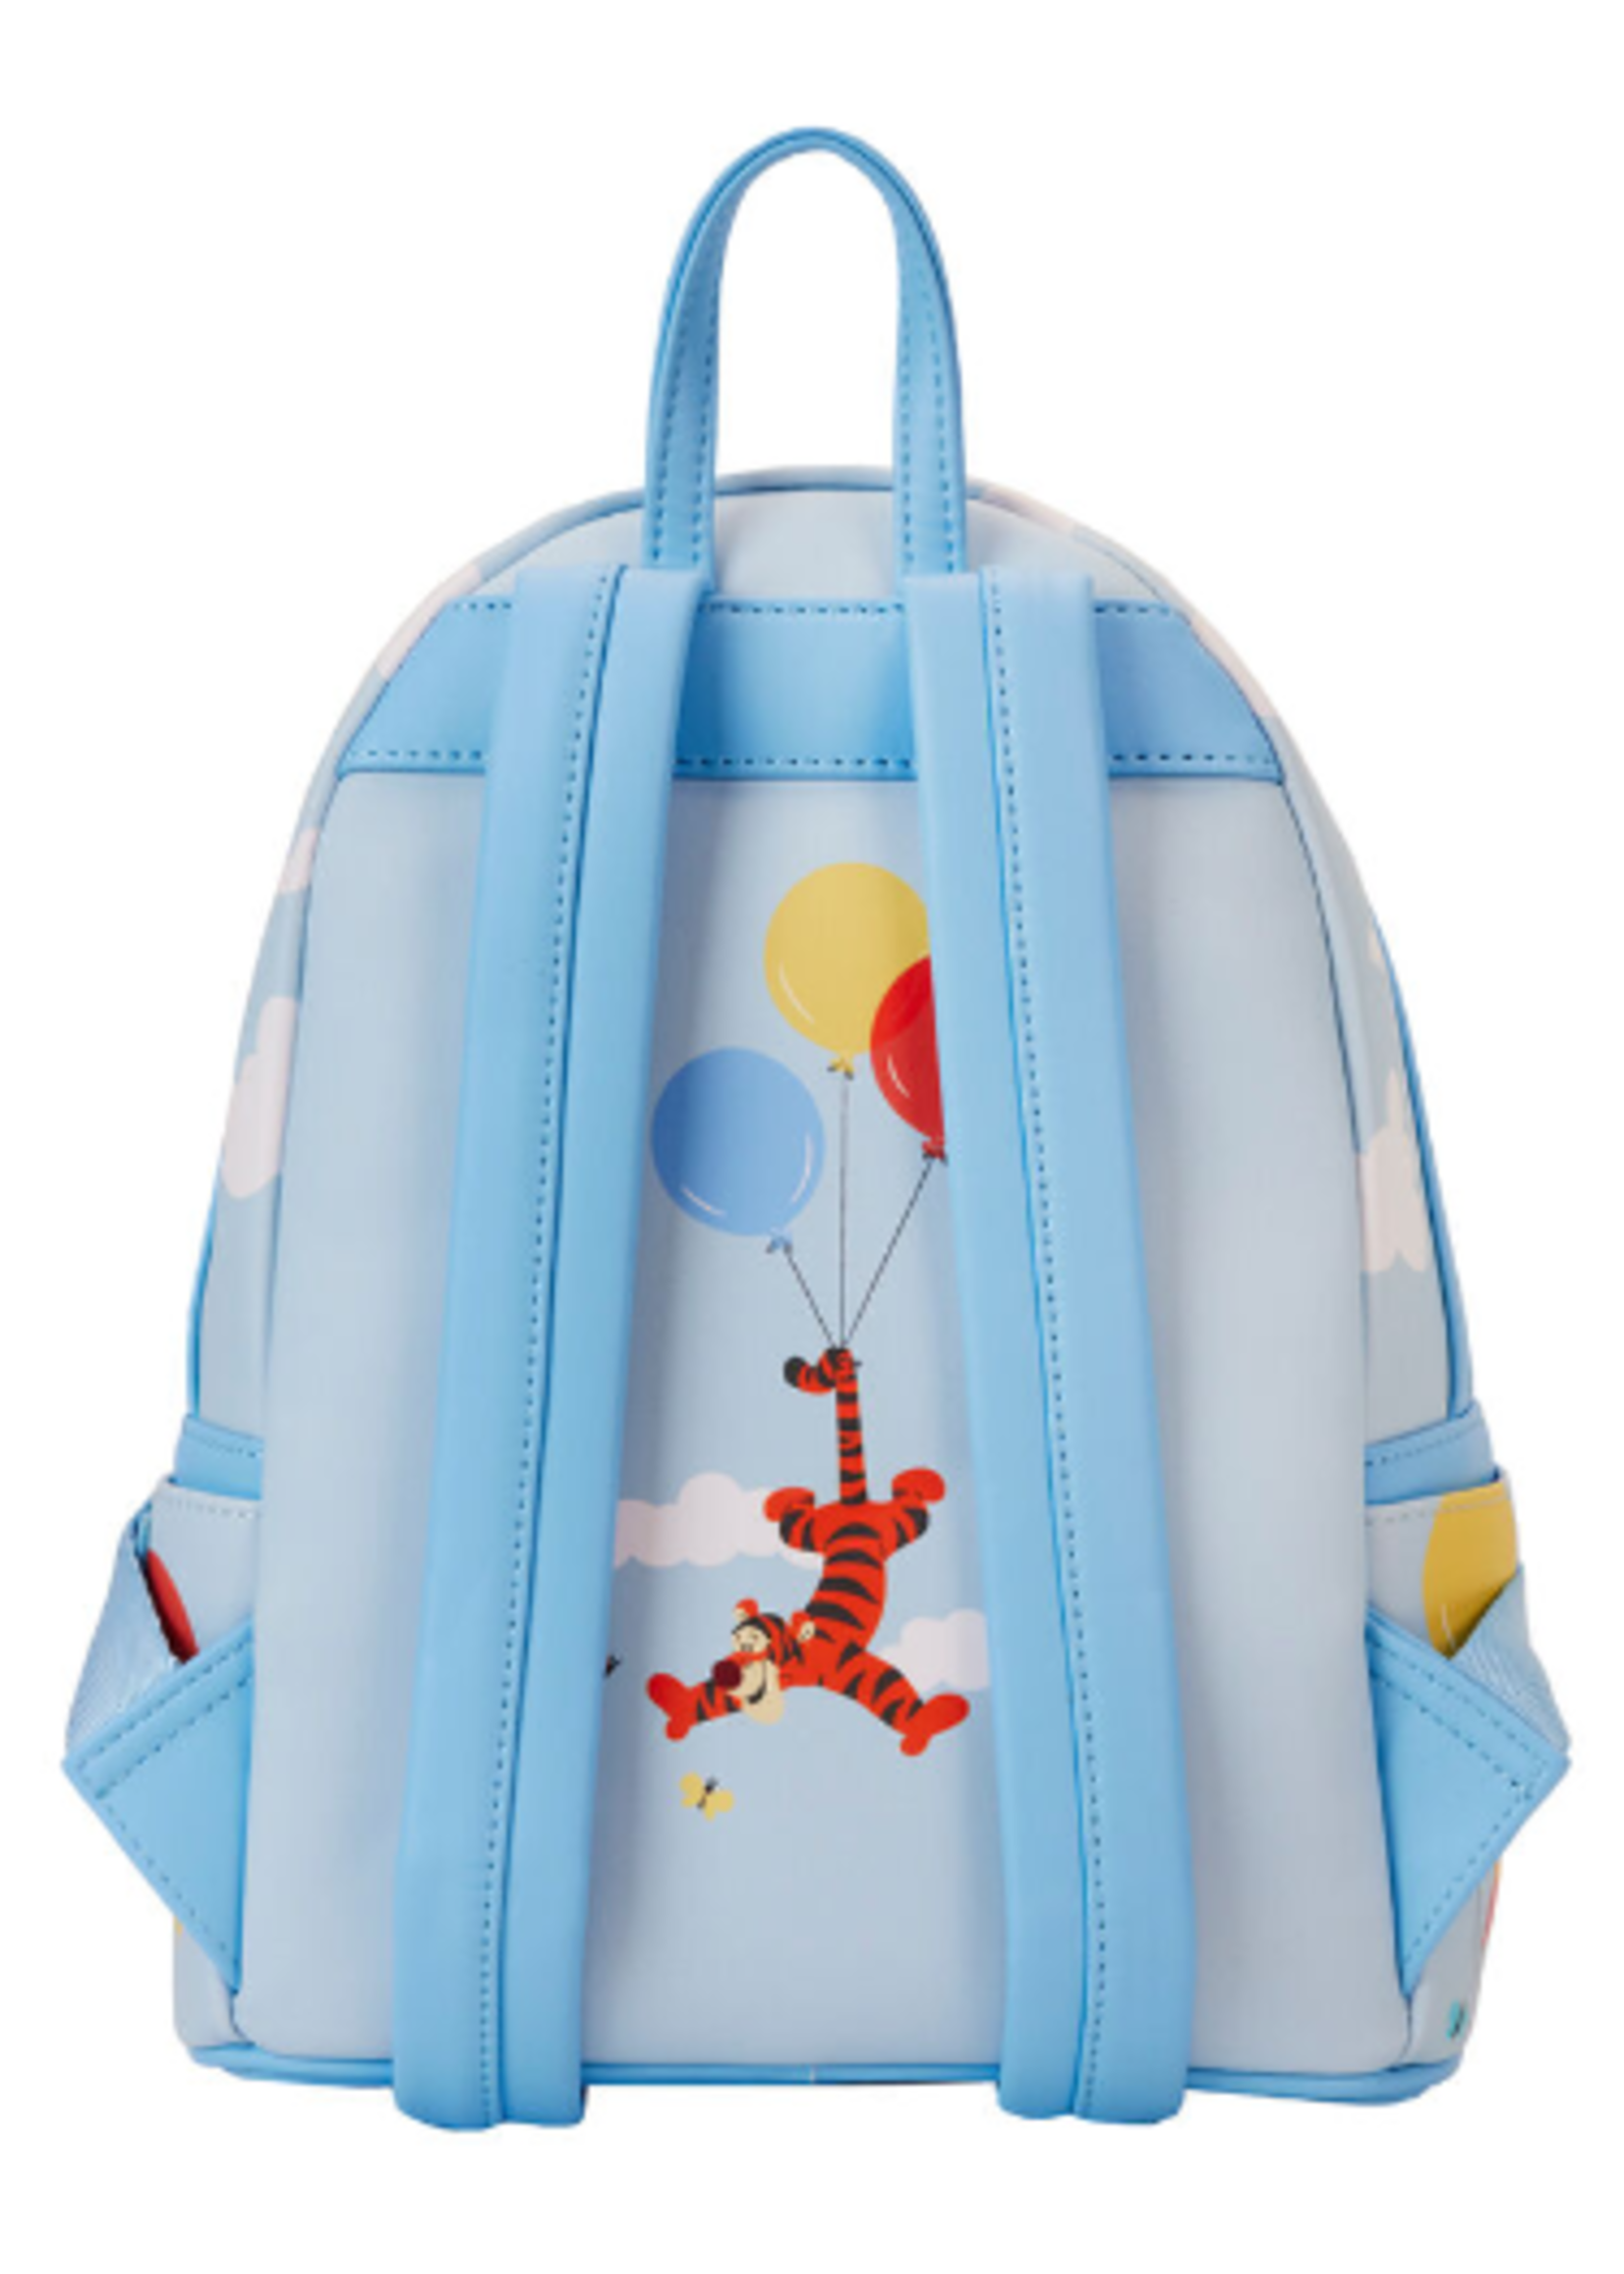 Loungefly LOUNGEFLY DISNEY WINNIE THE POOH BALLOONS BACKPACK